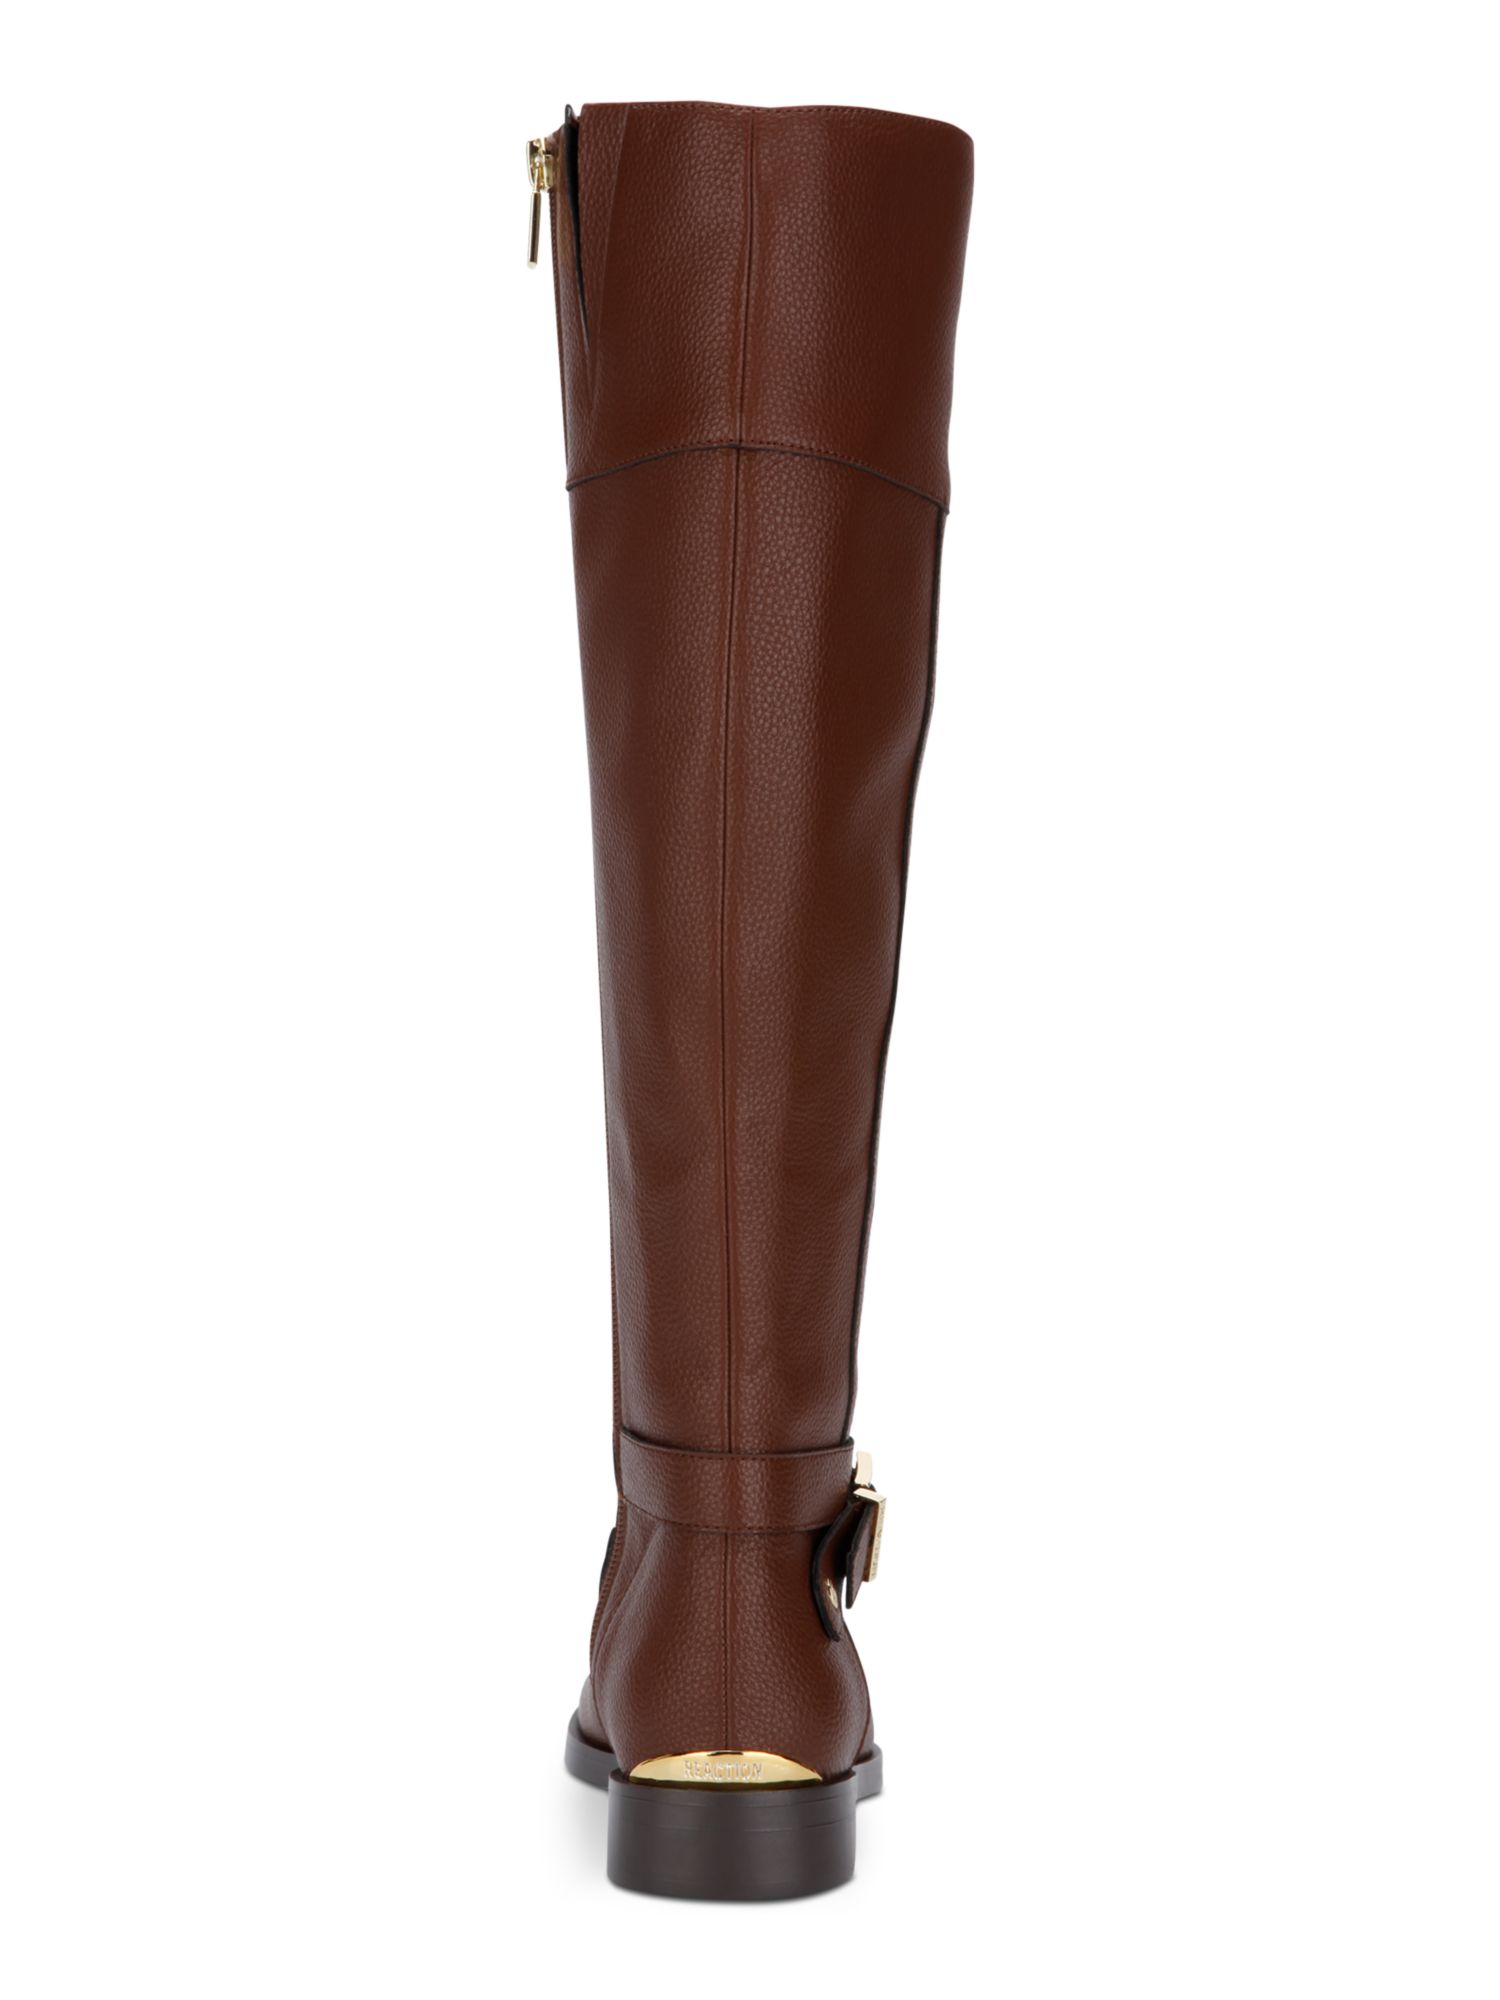 KENNETH COLE Womens Brown Thermoplastic Sole Gold Heel Accent Buckle Accent Wind Almond Toe Zip-Up Riding Boot 7 M